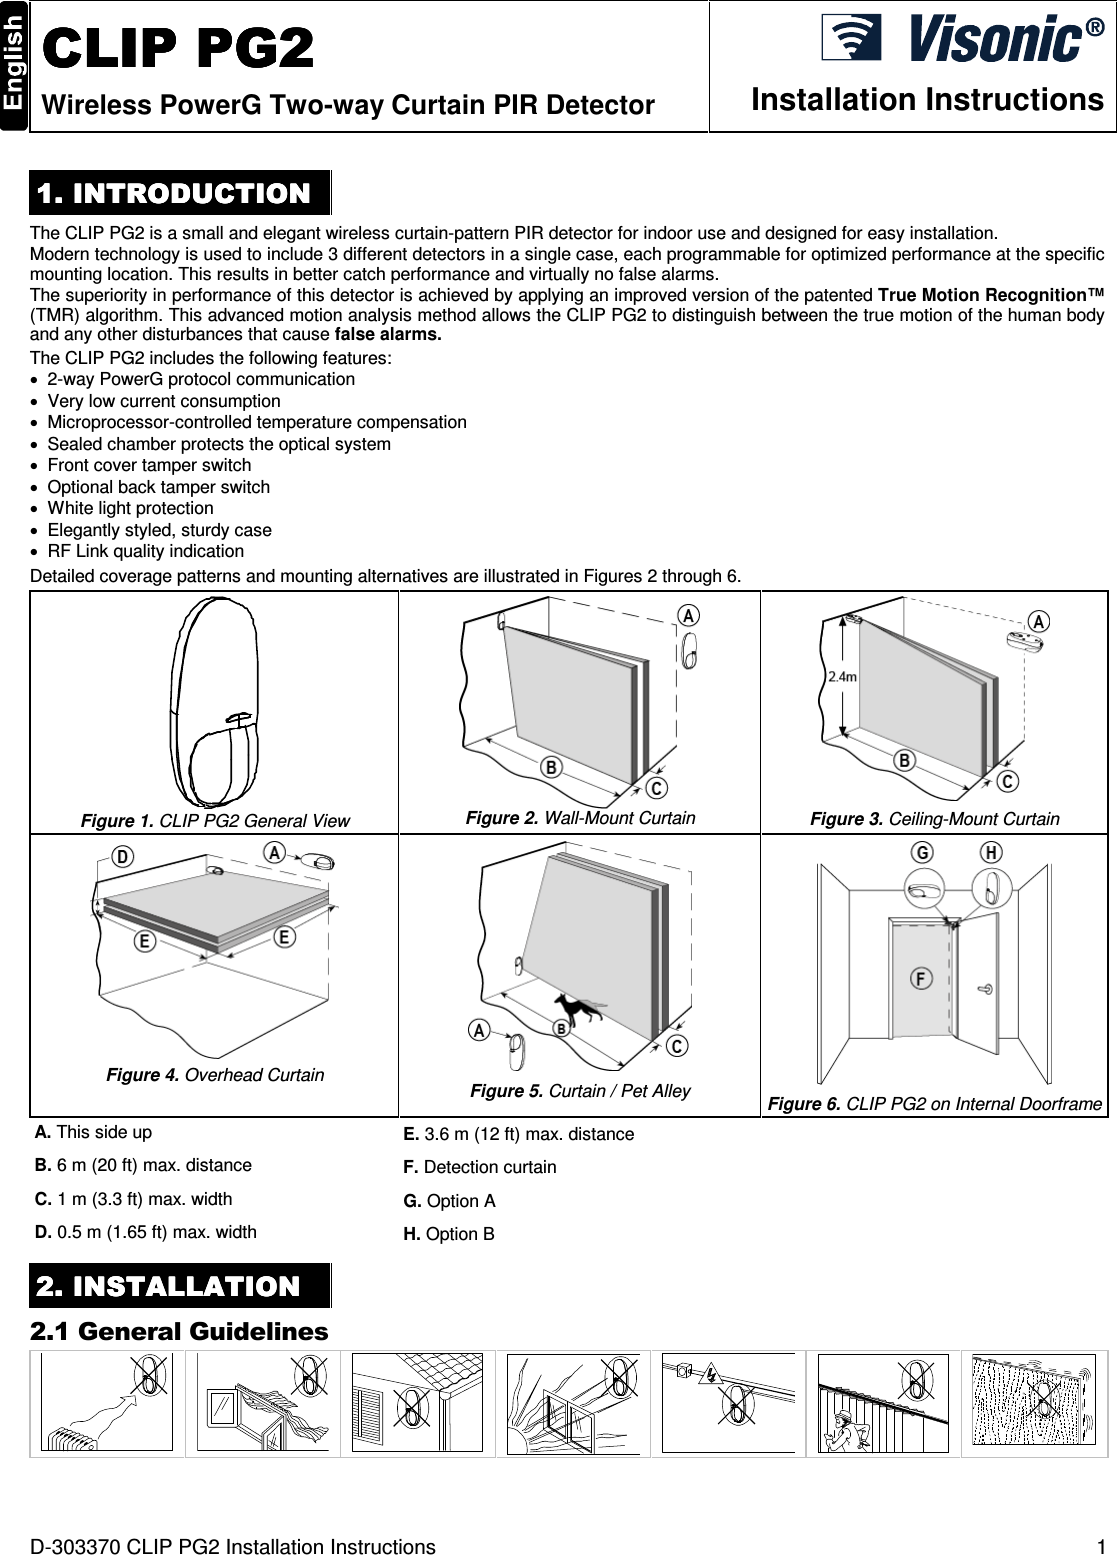 D-303370 CLIP PG2 Installation Instructions  1  CLIP PG2CLIP PG2CLIP PG2CLIP PG2    Wireless PowerG Two-way Curtain PIR Detector  Installation Instructions 1. INTRODUCTION1. INTRODUCTION1. INTRODUCTION1. INTRODUCTION    The CLIP PG2 is a small and elegant wireless curtain-pattern PIR detector for indoor use and designed for easy installation.  Modern technology is used to include 3 different detectors in a single case, each programmable for optimized performance at the specific mounting location. This results in better catch performance and virtually no false alarms. The superiority in performance of this detector is achieved by applying an improved version of the patented True Motion Recognition™ (TMR) algorithm. This advanced motion analysis method allows the CLIP PG2 to distinguish between the true motion of the human body and any other disturbances that cause false alarms. The CLIP PG2 includes the following features: •  2-way PowerG protocol communication •  Very low current consumption •  Microprocessor-controlled temperature compensation •  Sealed chamber protects the optical system •  Front cover tamper switch •  Optional back tamper switch •  White light protection •  Elegantly styled, sturdy case •  RF Link quality indication Detailed coverage patterns and mounting alternatives are illustrated in Figures 2 through 6.  Figure 1. CLIP PG2 General View  Figure 2. Wall-Mount Curtain  Figure 3. Ceiling-Mount Curtain  Figure 4. Overhead Curtain   Figure 5. Curtain / Pet Alley  Figure 6. CLIP PG2 on Internal Doorframe A. This side up  E. 3.6 m (12 ft) max. distance B. 6 m (20 ft) max. distance  F. Detection curtain C. 1 m (3.3 ft) max. width   G. Option A D. 0.5 m (1.65 ft) max. width  H. Option B 2222. . . . INSTALLATIONINSTALLATIONINSTALLATIONINSTALLATION    2.1 General Guidelines        